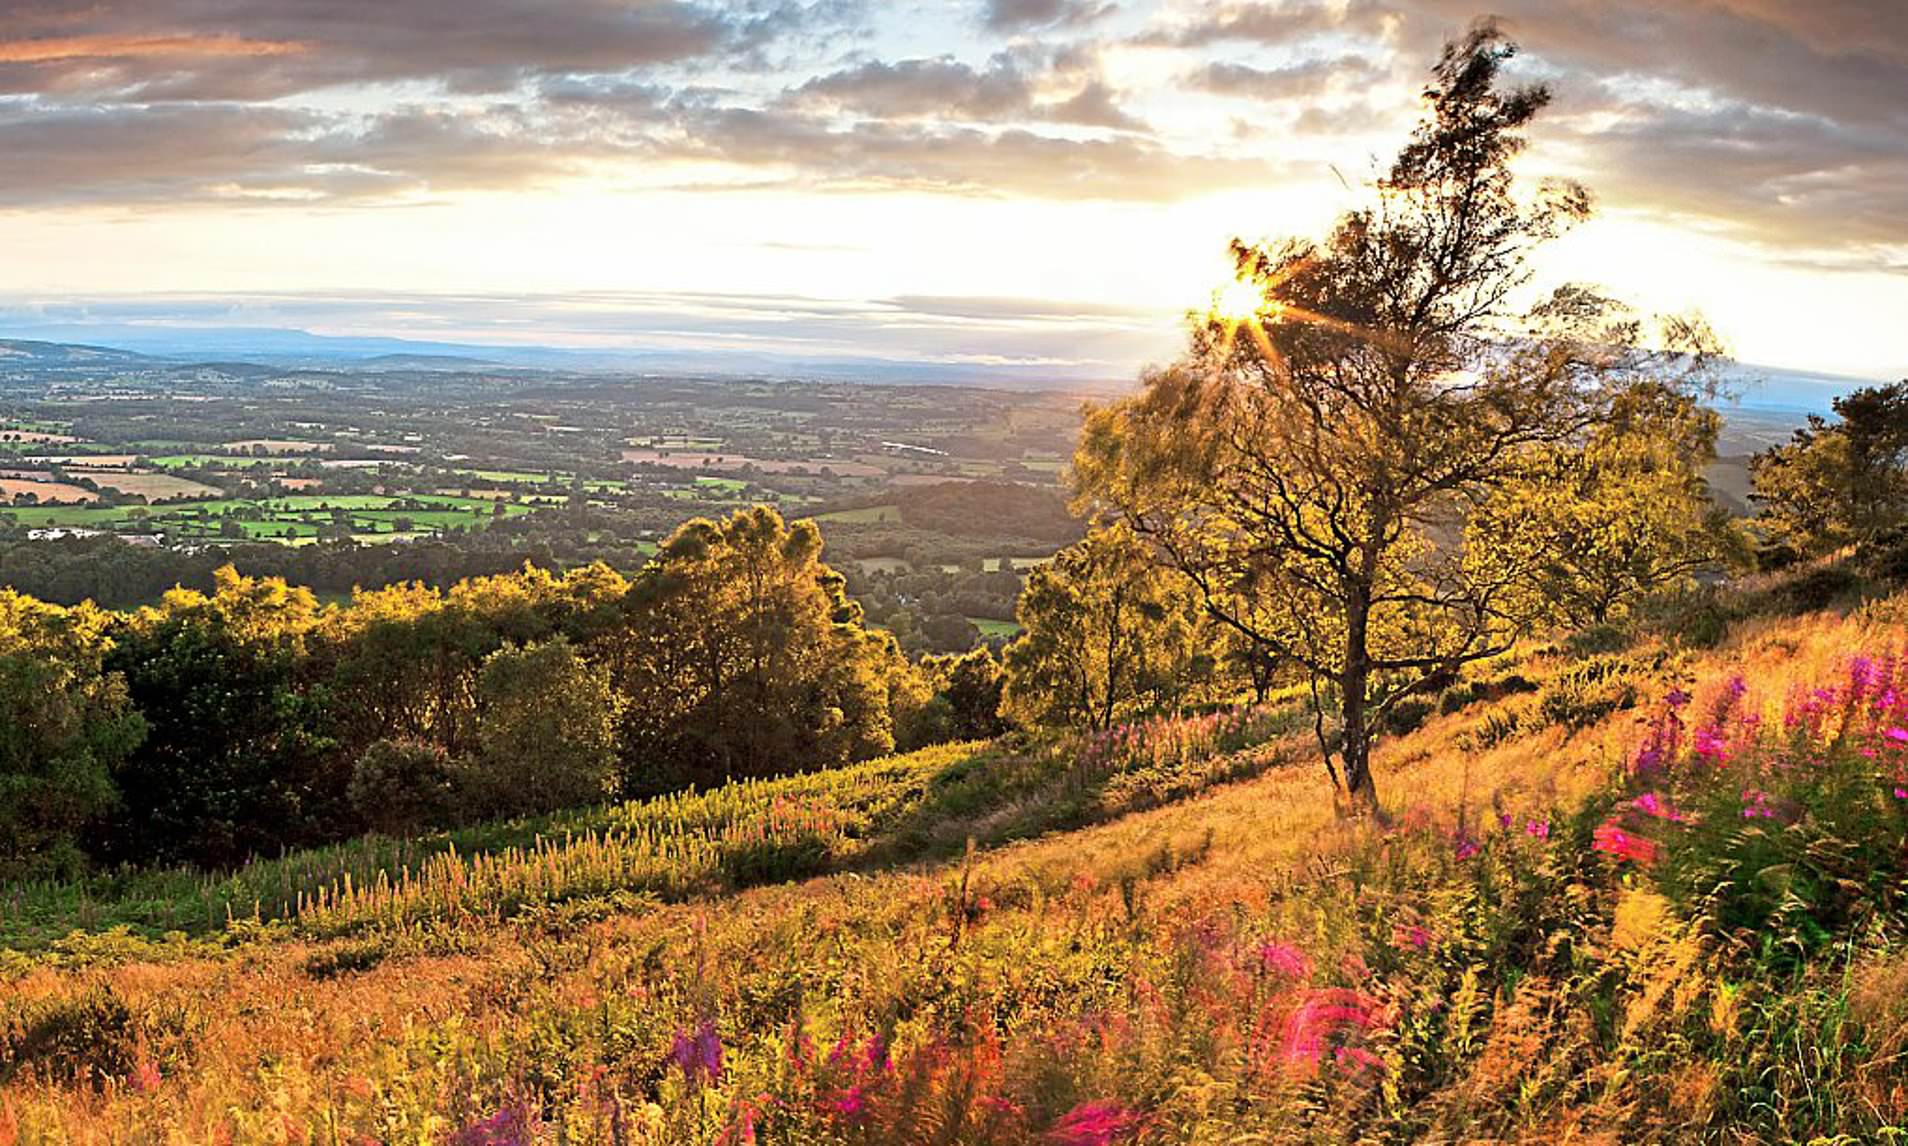 Malvern Hills Area of Outstanding Natural Beauty